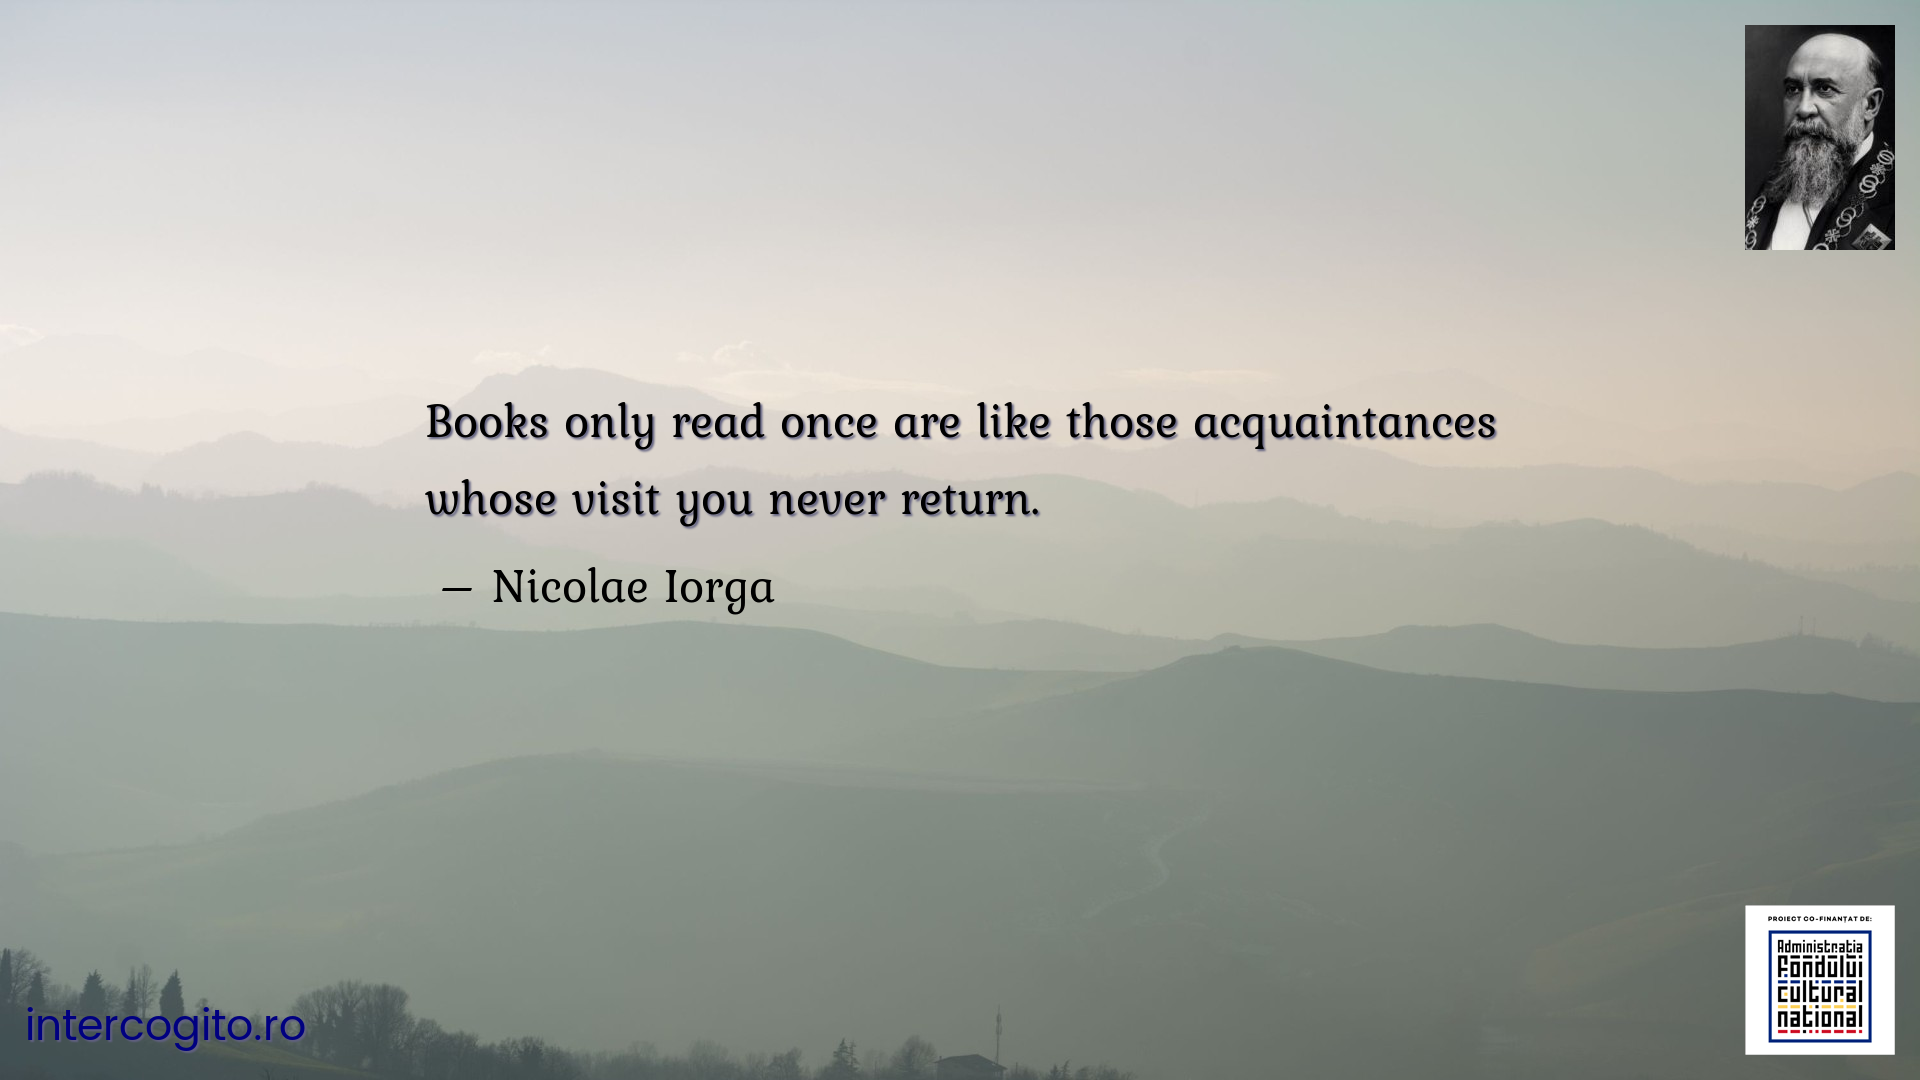 Books only read once are like those acquaintances whose visit you never return.